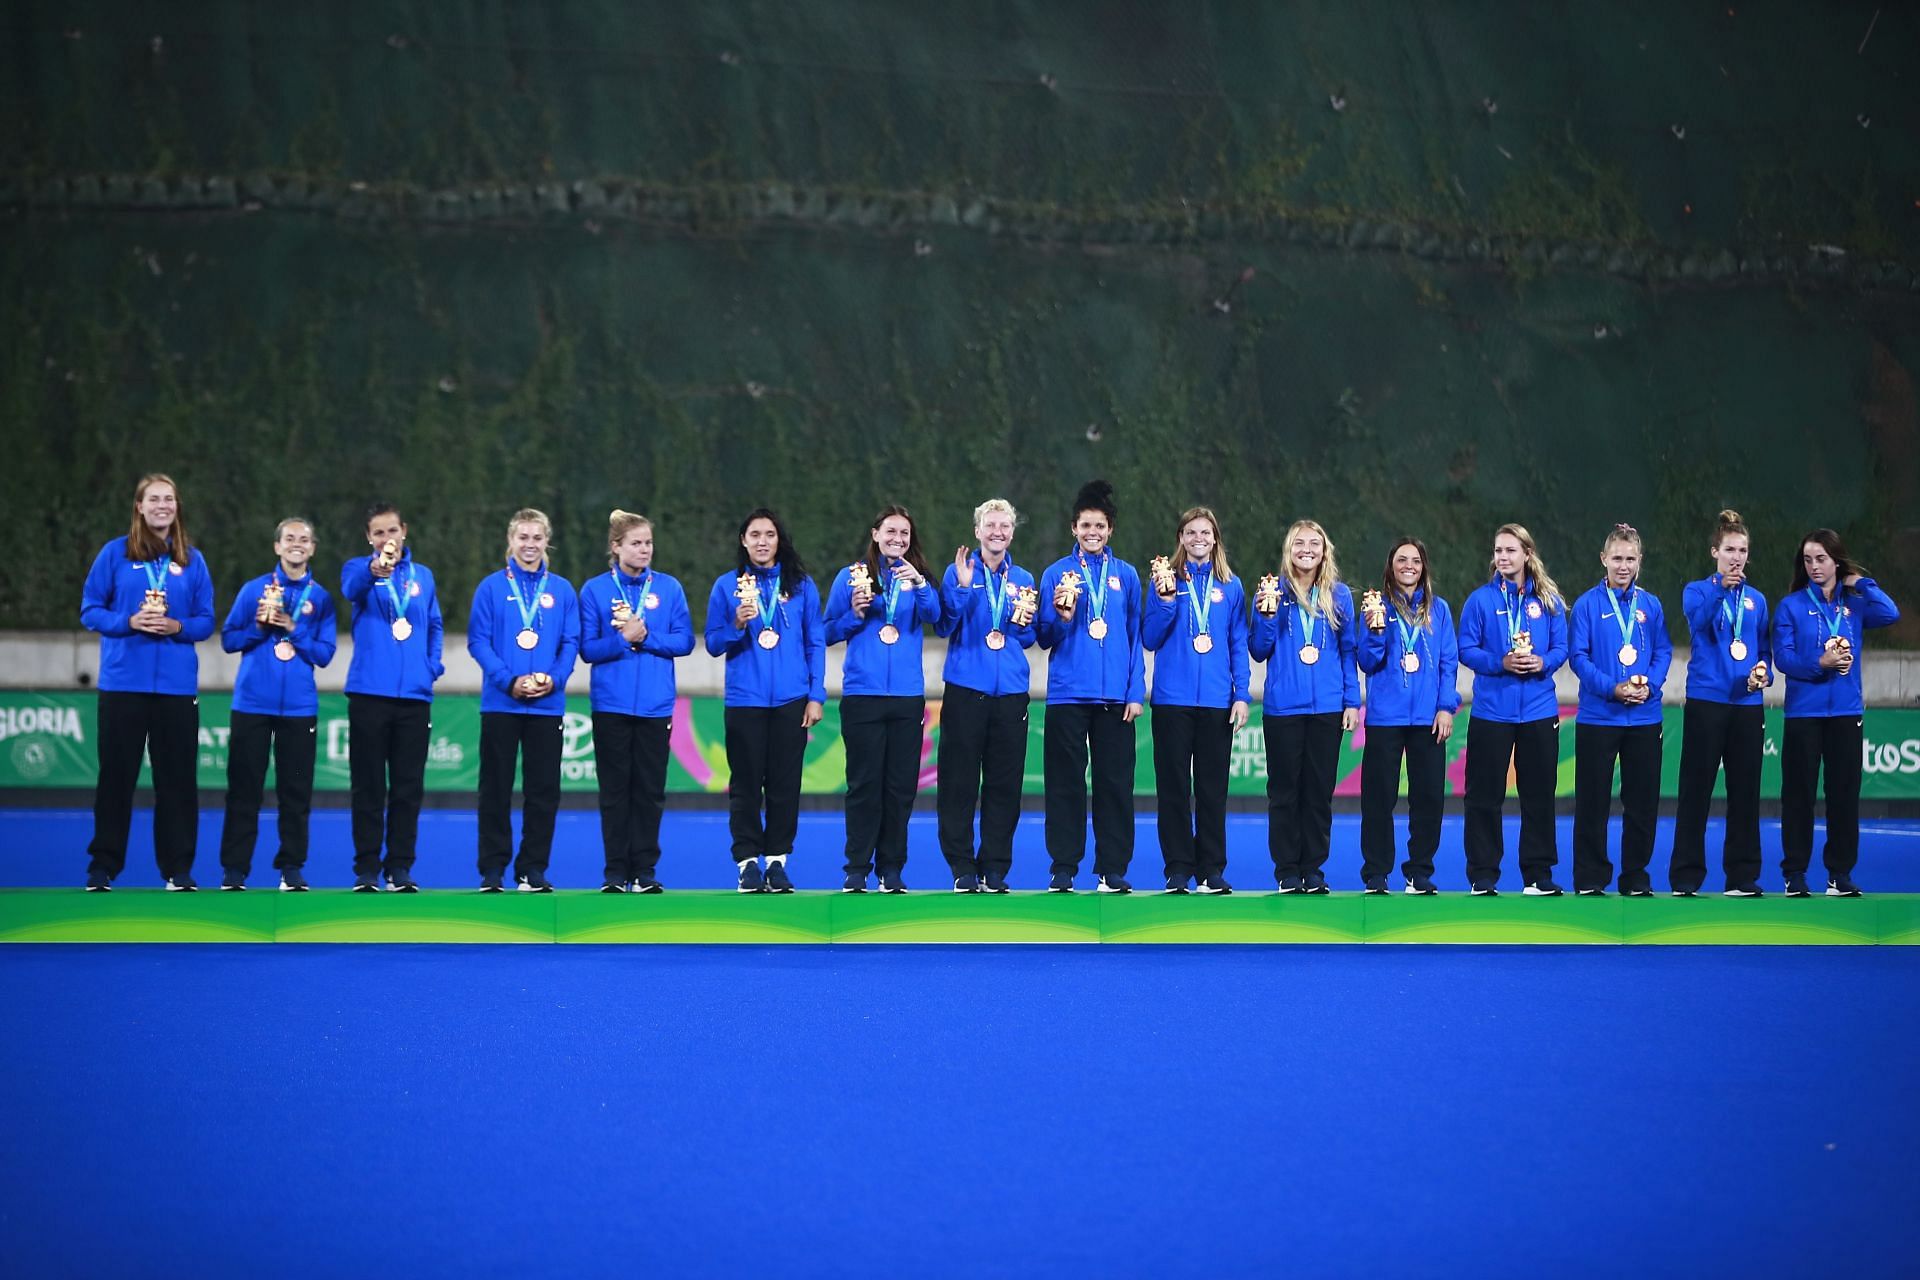 United States team at the 2019 Pan American Games. (Photo by Daniel Apuy/Getty Images)